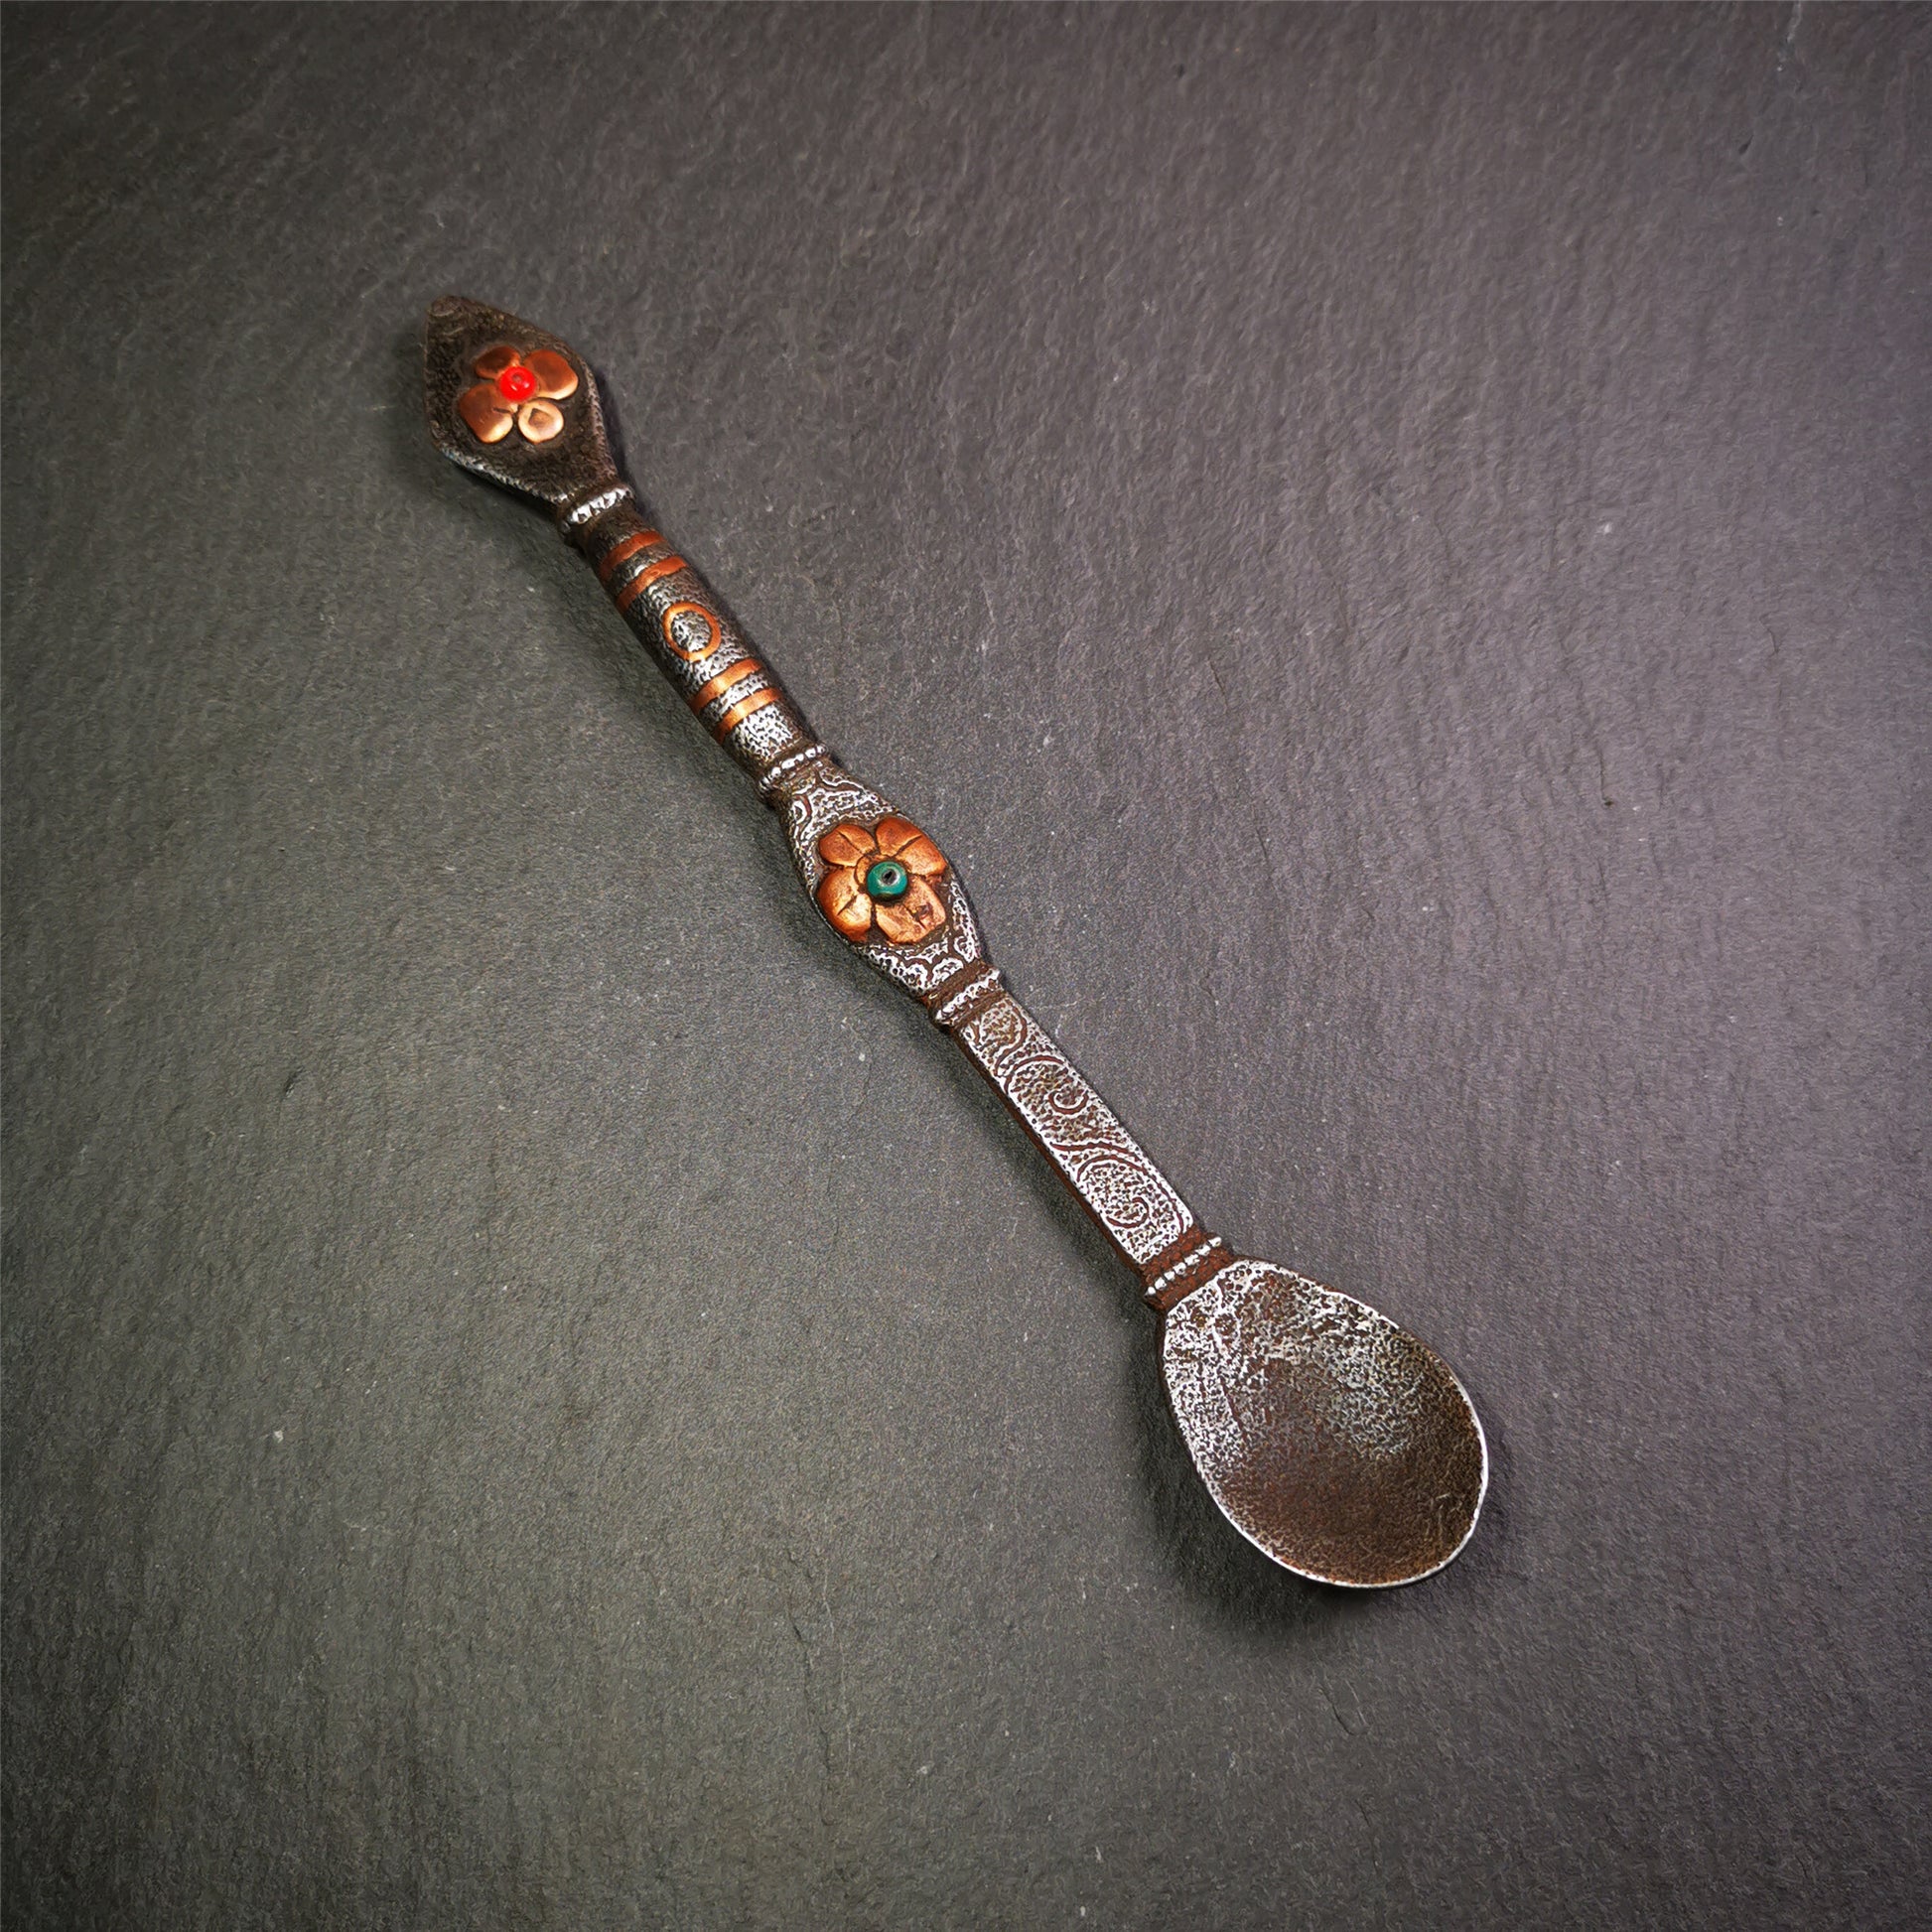 This offering spoon is handmade by Tibetan craftsmen from Hepo Town, Baiyu County,the birthplace of the famous Tibetan handicrafts. It is entirely hand-carved with cold iron and copper,lenght about 7.1 inches. You can see teh intricate engraved detail along the handle, neck and bowl,very beautiful. Religious dharma tool used in Buddhist shrine.